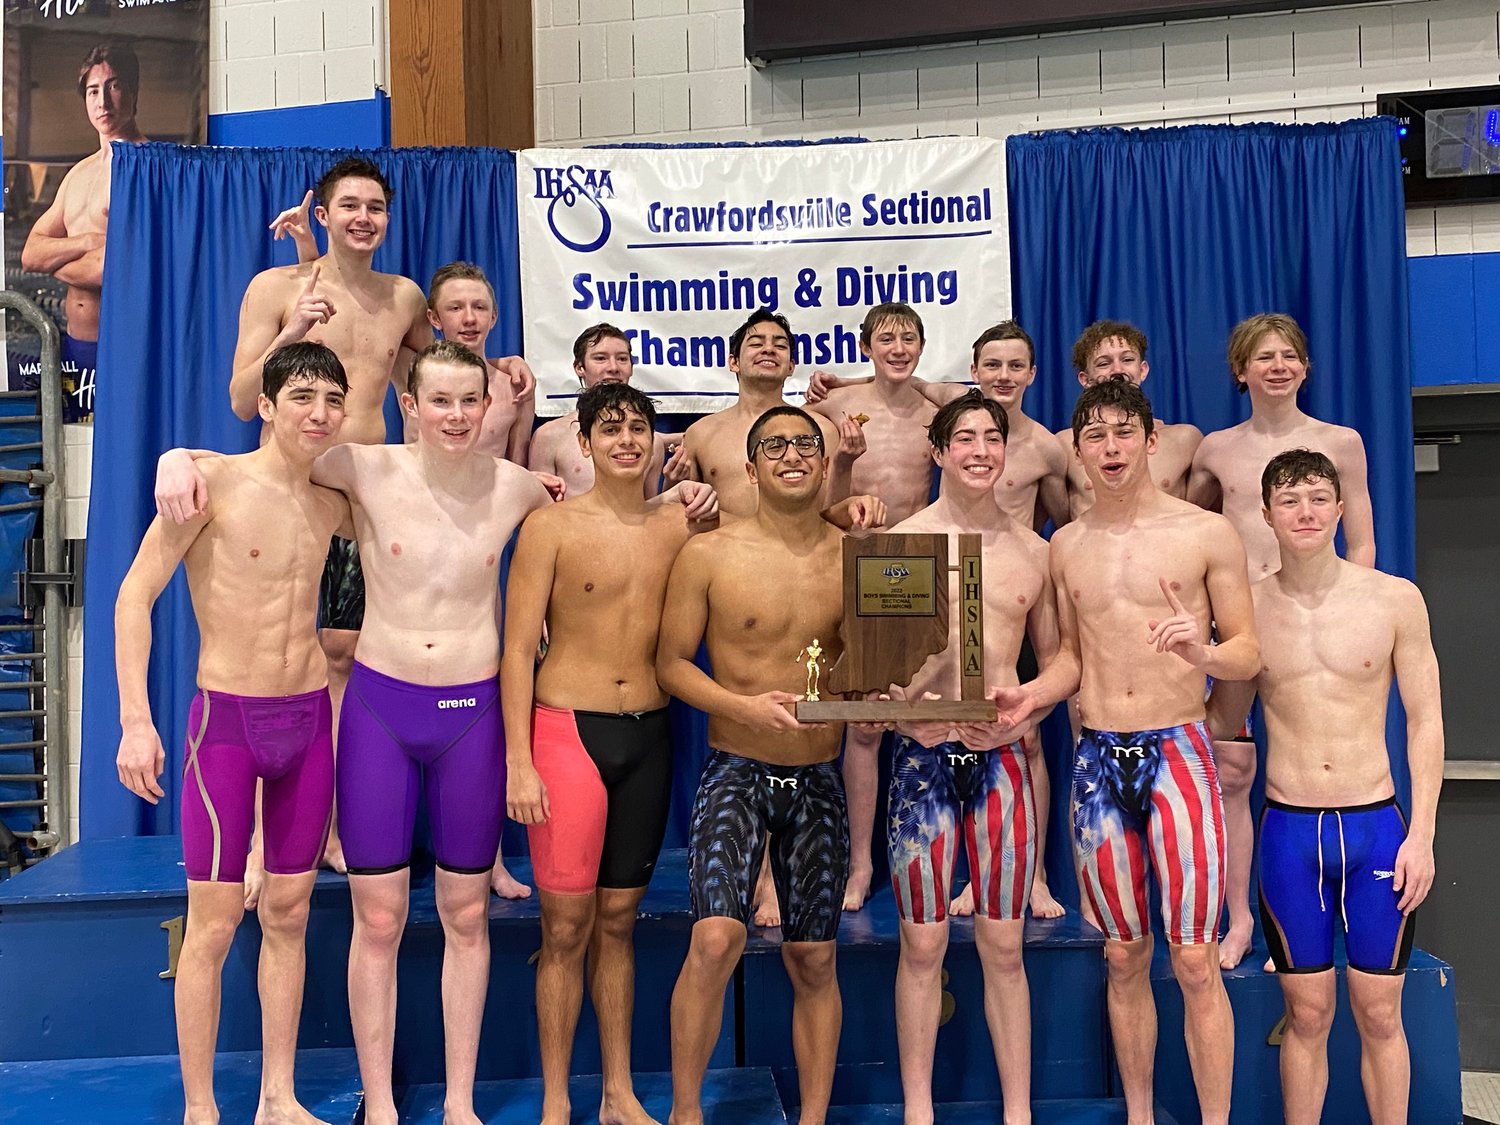 Crawfordsville boys swimming dominated their way to their 7th sectional title in 8 years by winning 10 of the 11 events. The Athenians will be sending 8 individuals to IUPUI for the state finals on Friday.